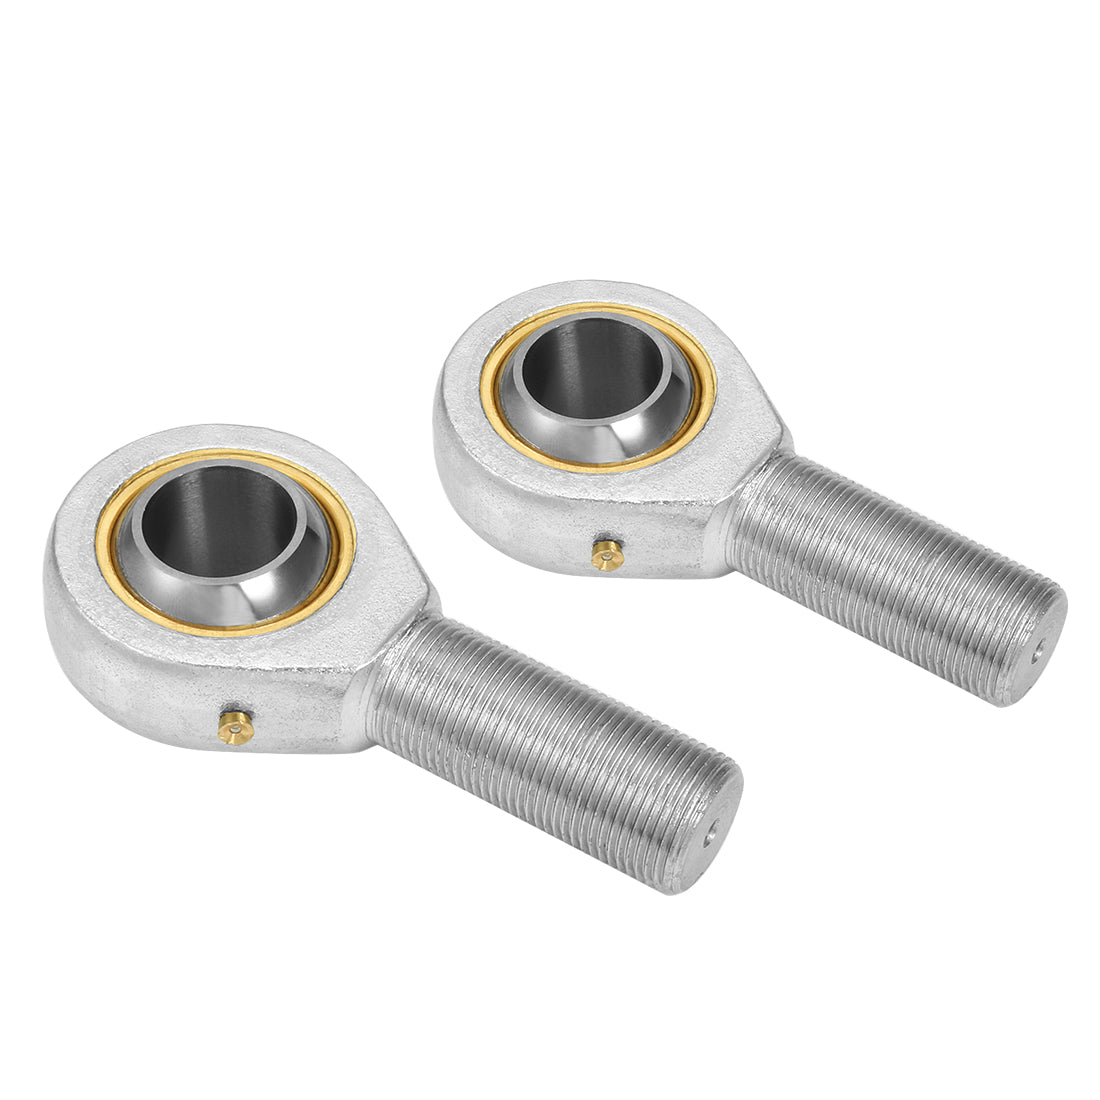 uxcell Uxcell POS10, Rod End Bearing, 10mm Inside Dia Economy Self Lubricating Male Right Hand 2pcs